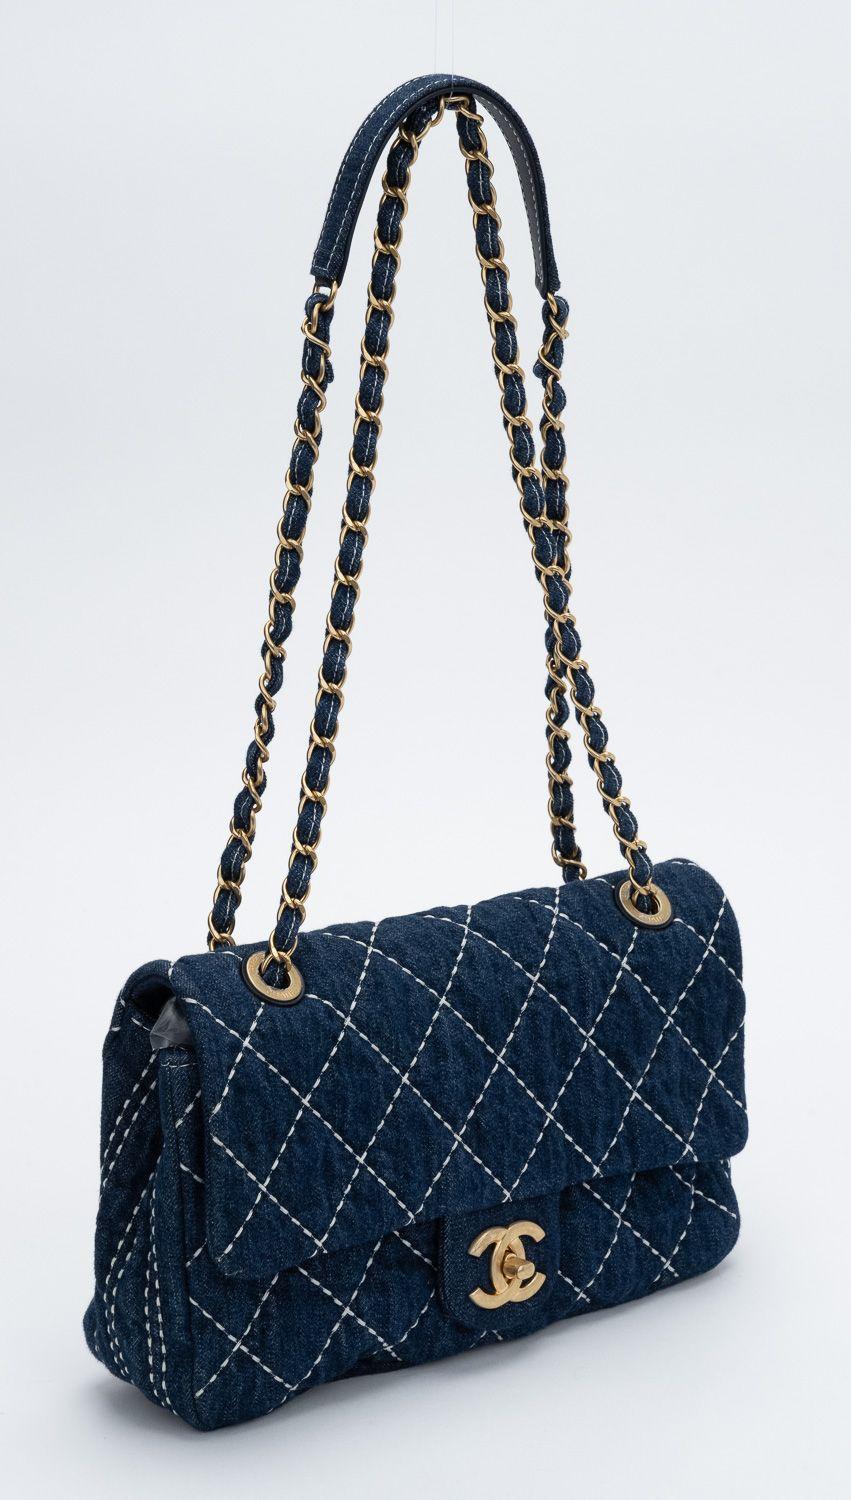 This Chanel Denim Quilted Denim Trip Single Flap bag is finely crafted of diamond quilted blue denim with white contrast stitching. The bag features aged gold chain straps and an oversized CC turn lock, it opens to a matching denim interior with a